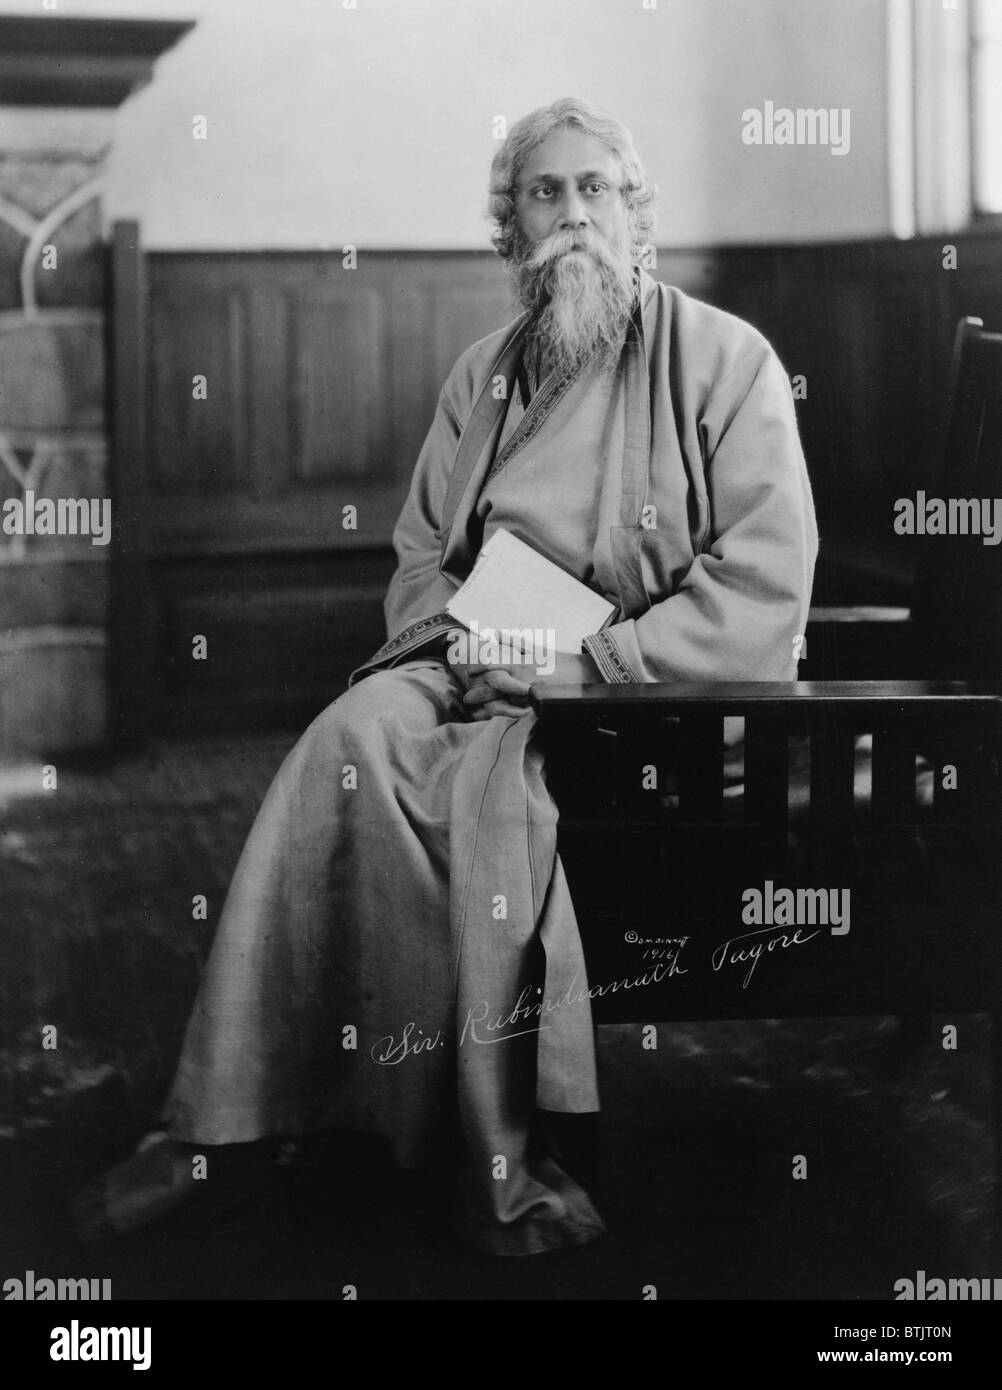 Sir Tagore Rabindranath, (1861-1941) multi talented Indian writer, musician and artist won the Nobel Prize for Literature in 1913. 1916 portrait. Stock Photo